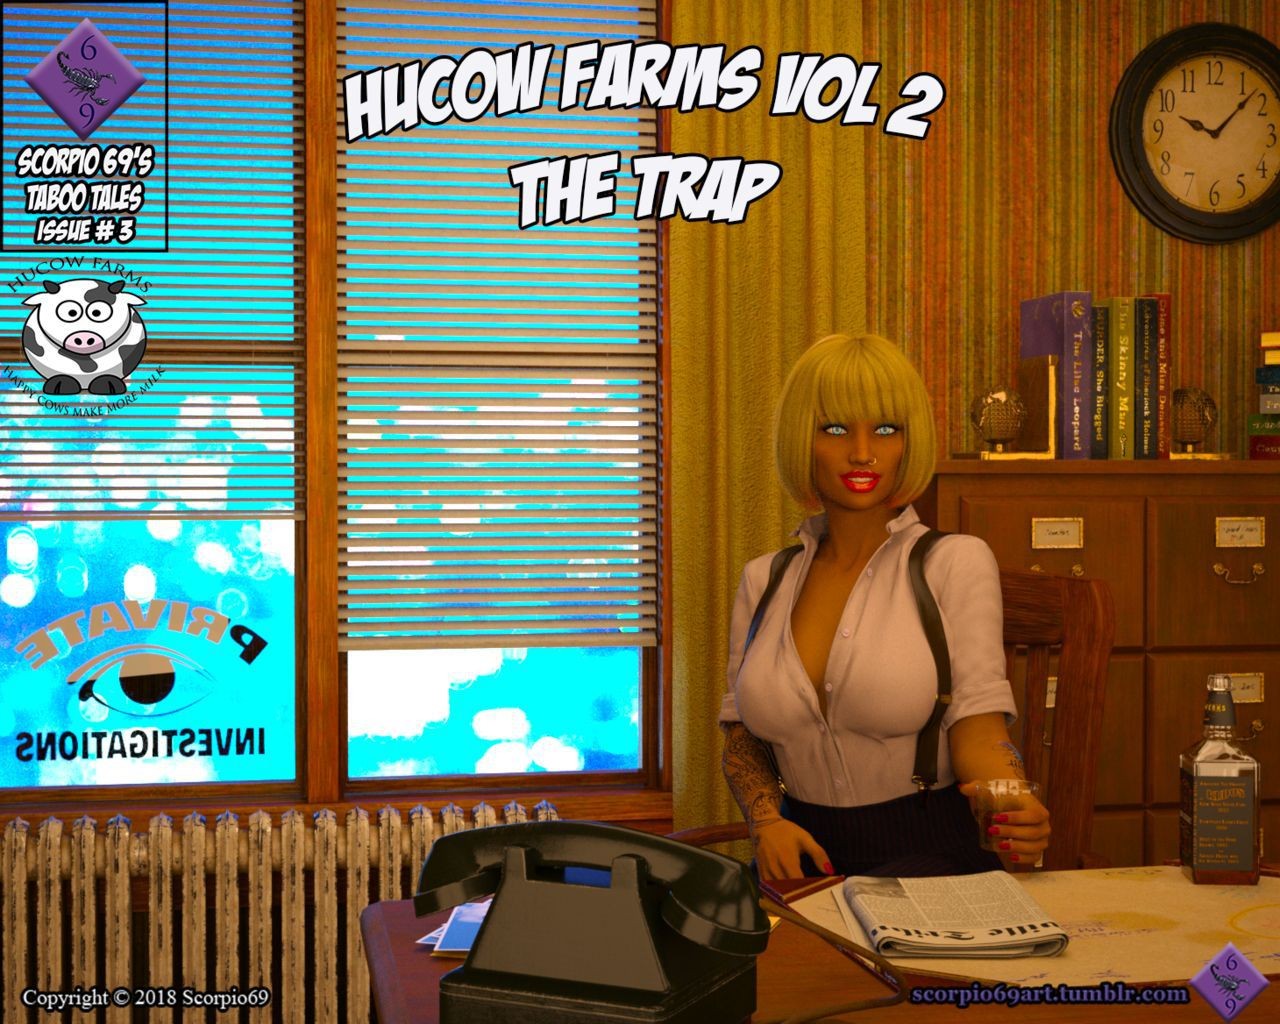 Old And Young Hucow Farms Vol 2 - The Trap (ongoing) Culo